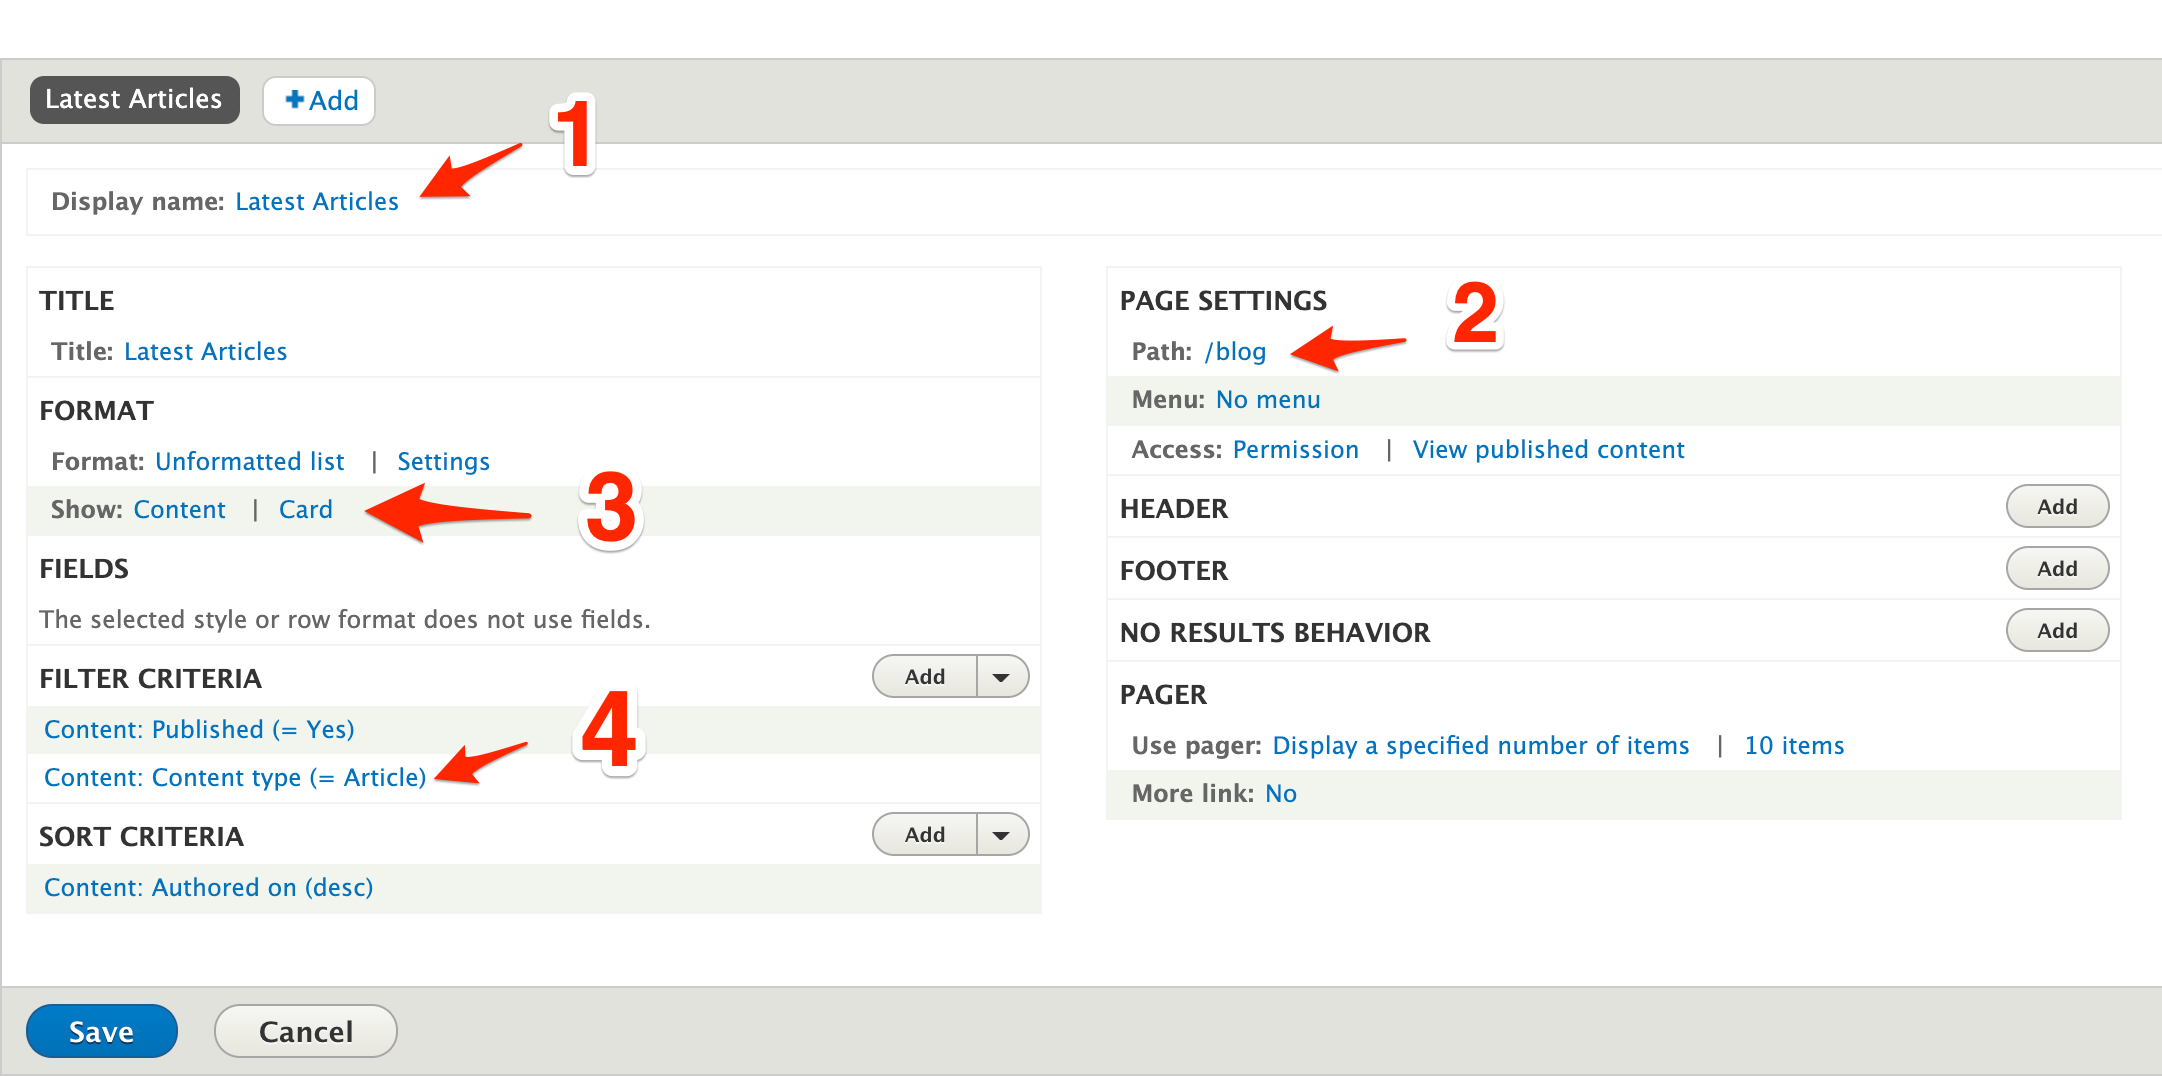 Screenshot of settings for Latest Articles view